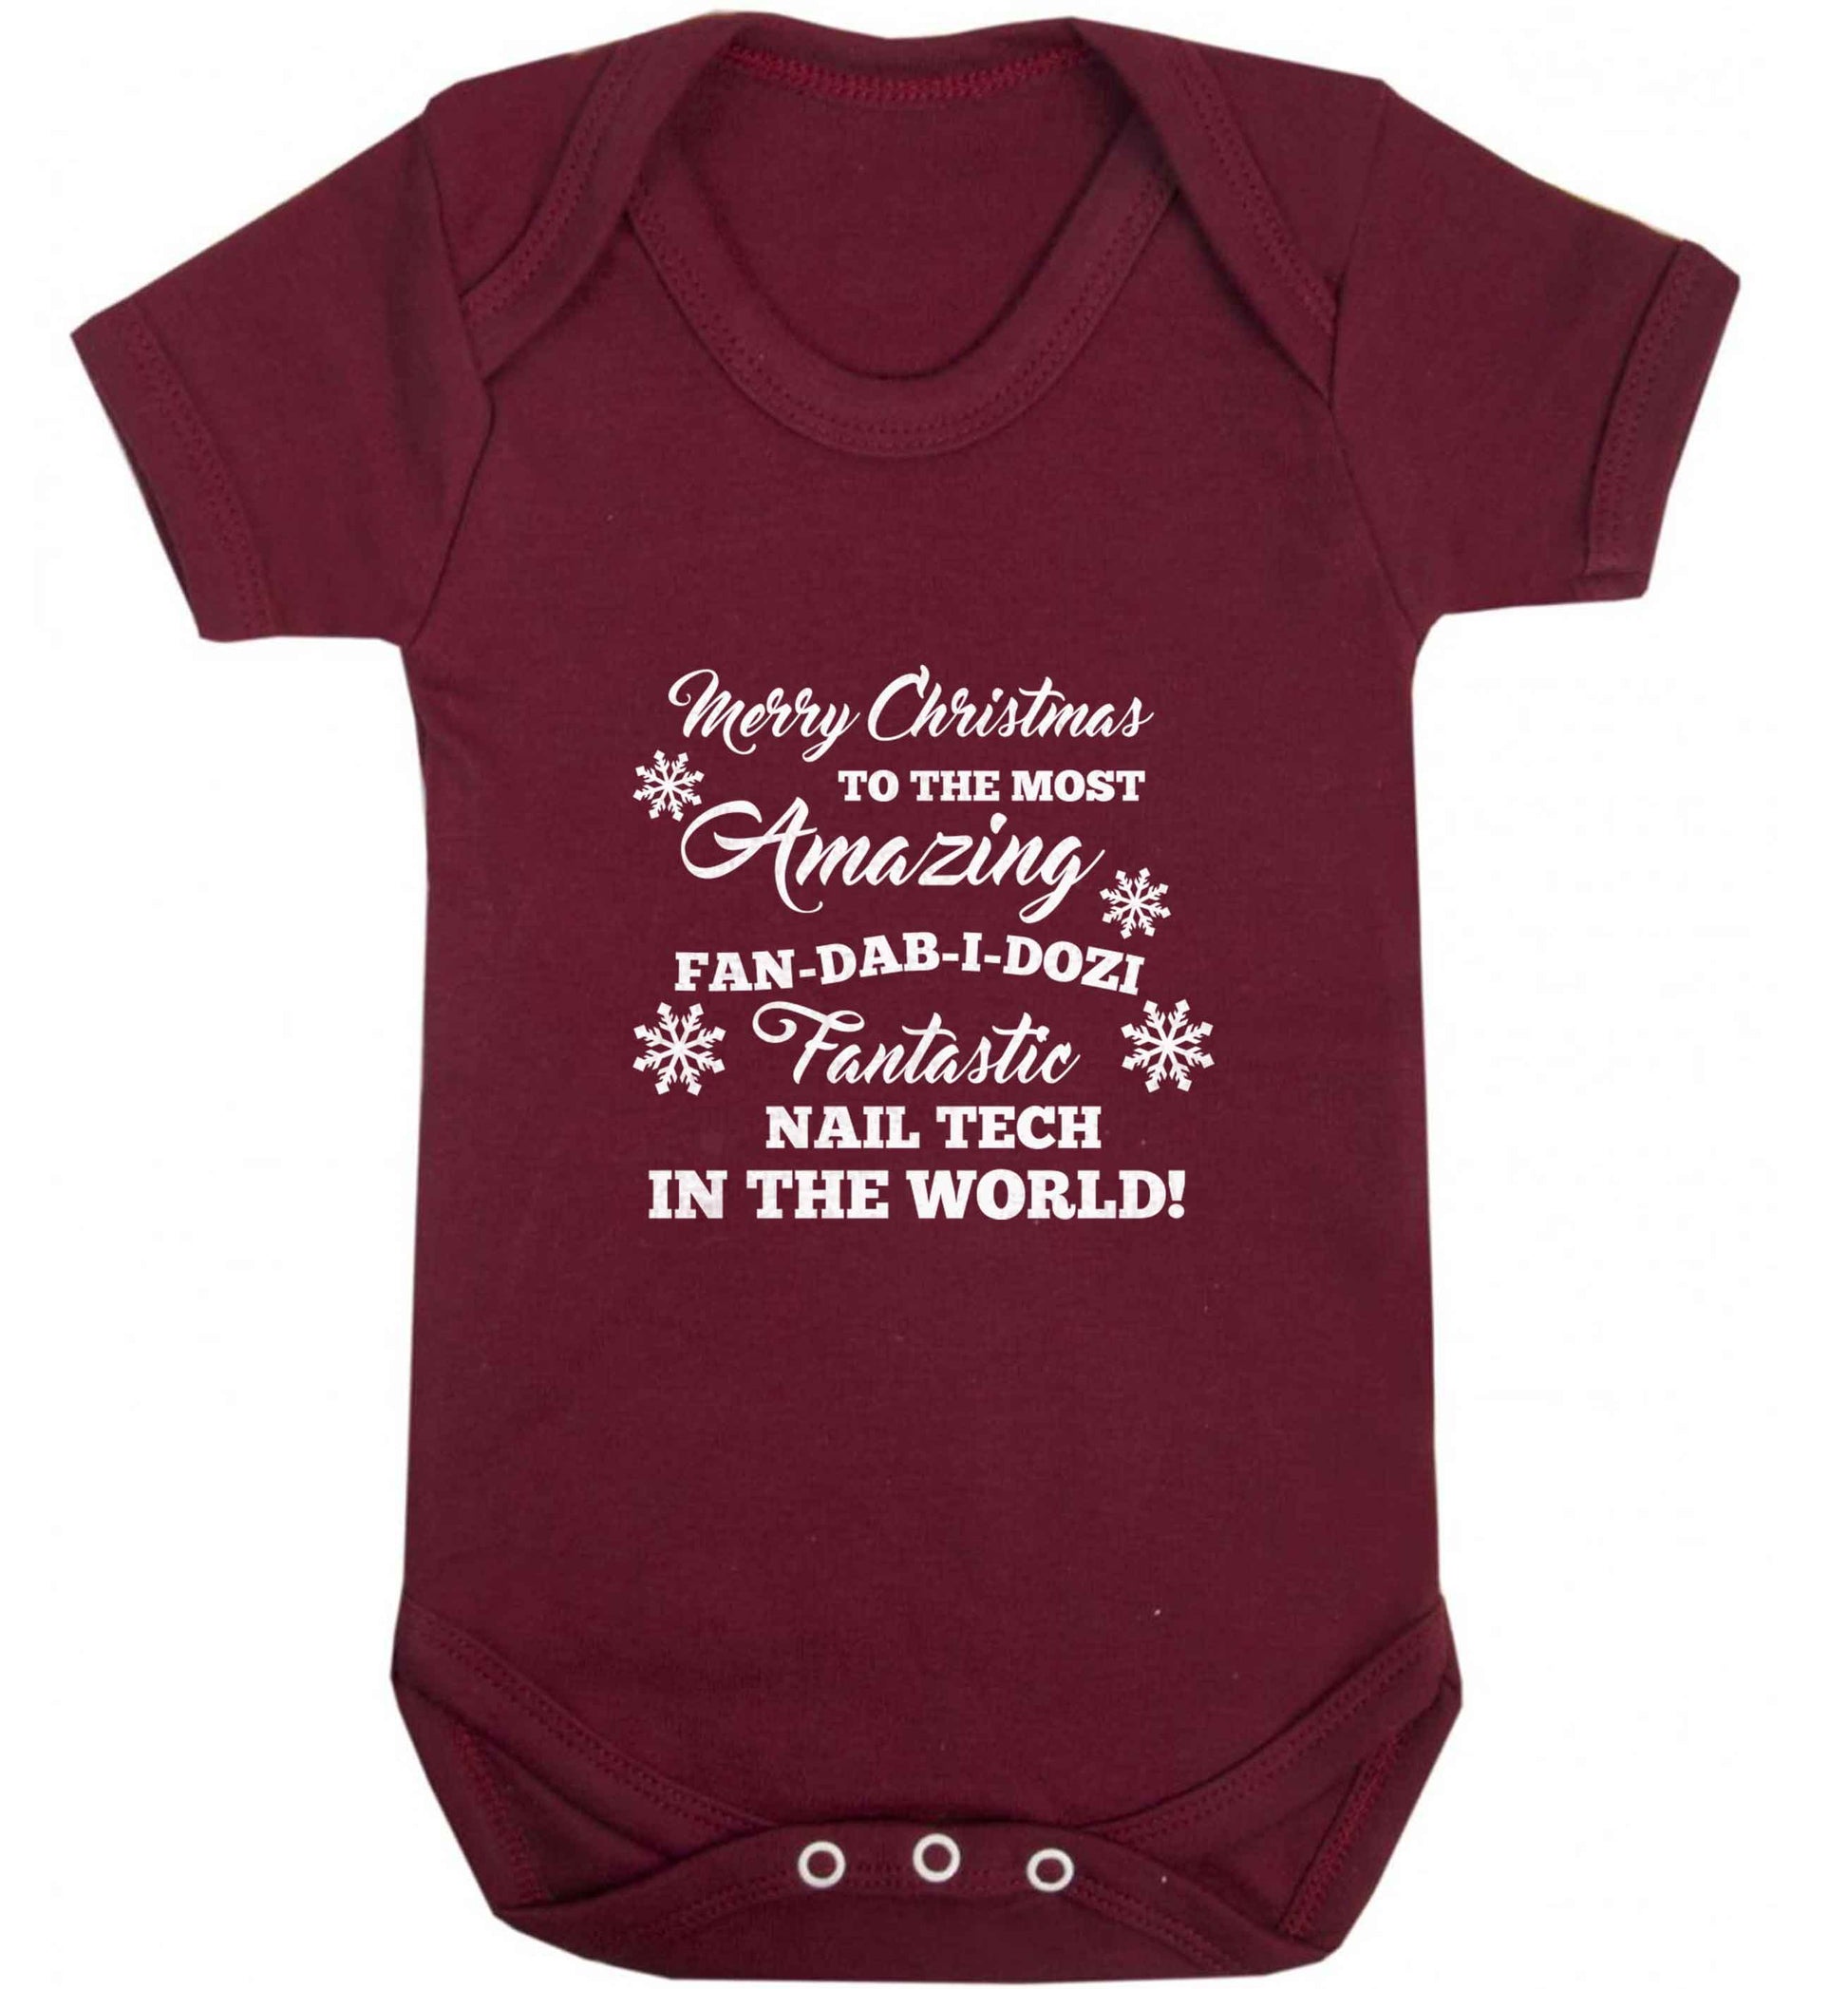 Merry Christmas to the most amazing fan-dab-i-dozi fantasic nail technician in the world baby vest maroon 18-24 months